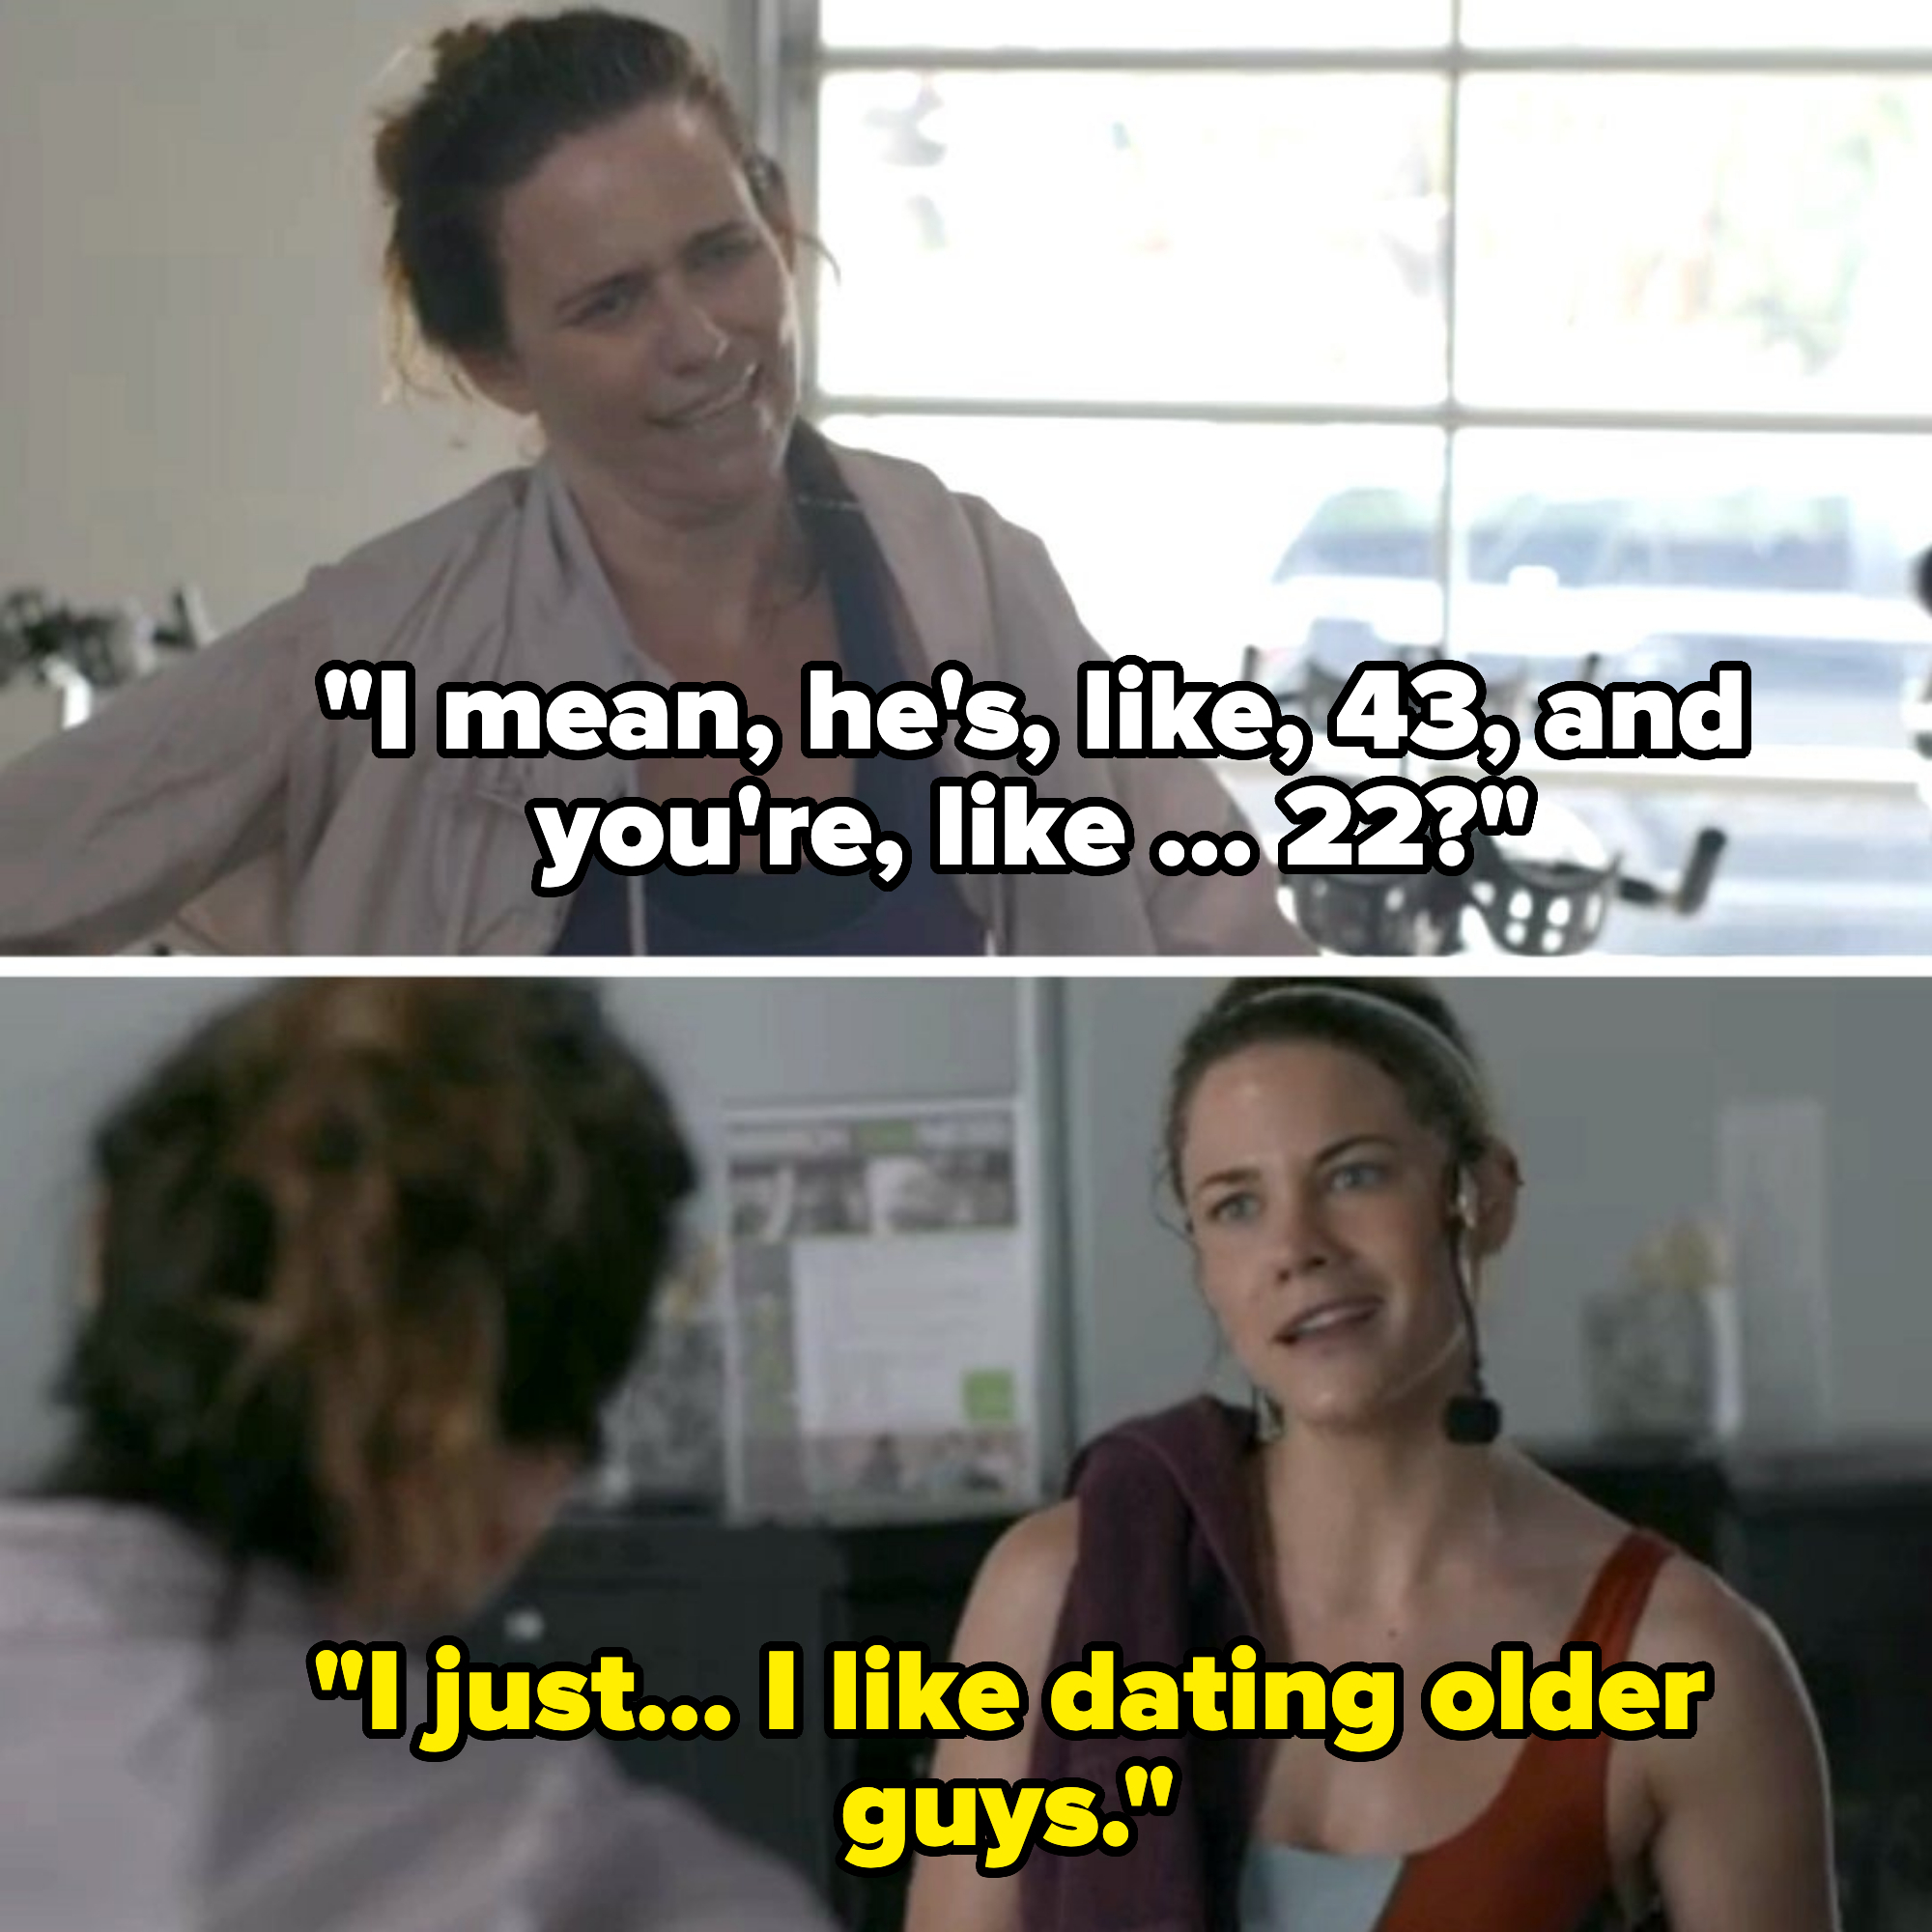 &quot;I like dating older guys.&quot;